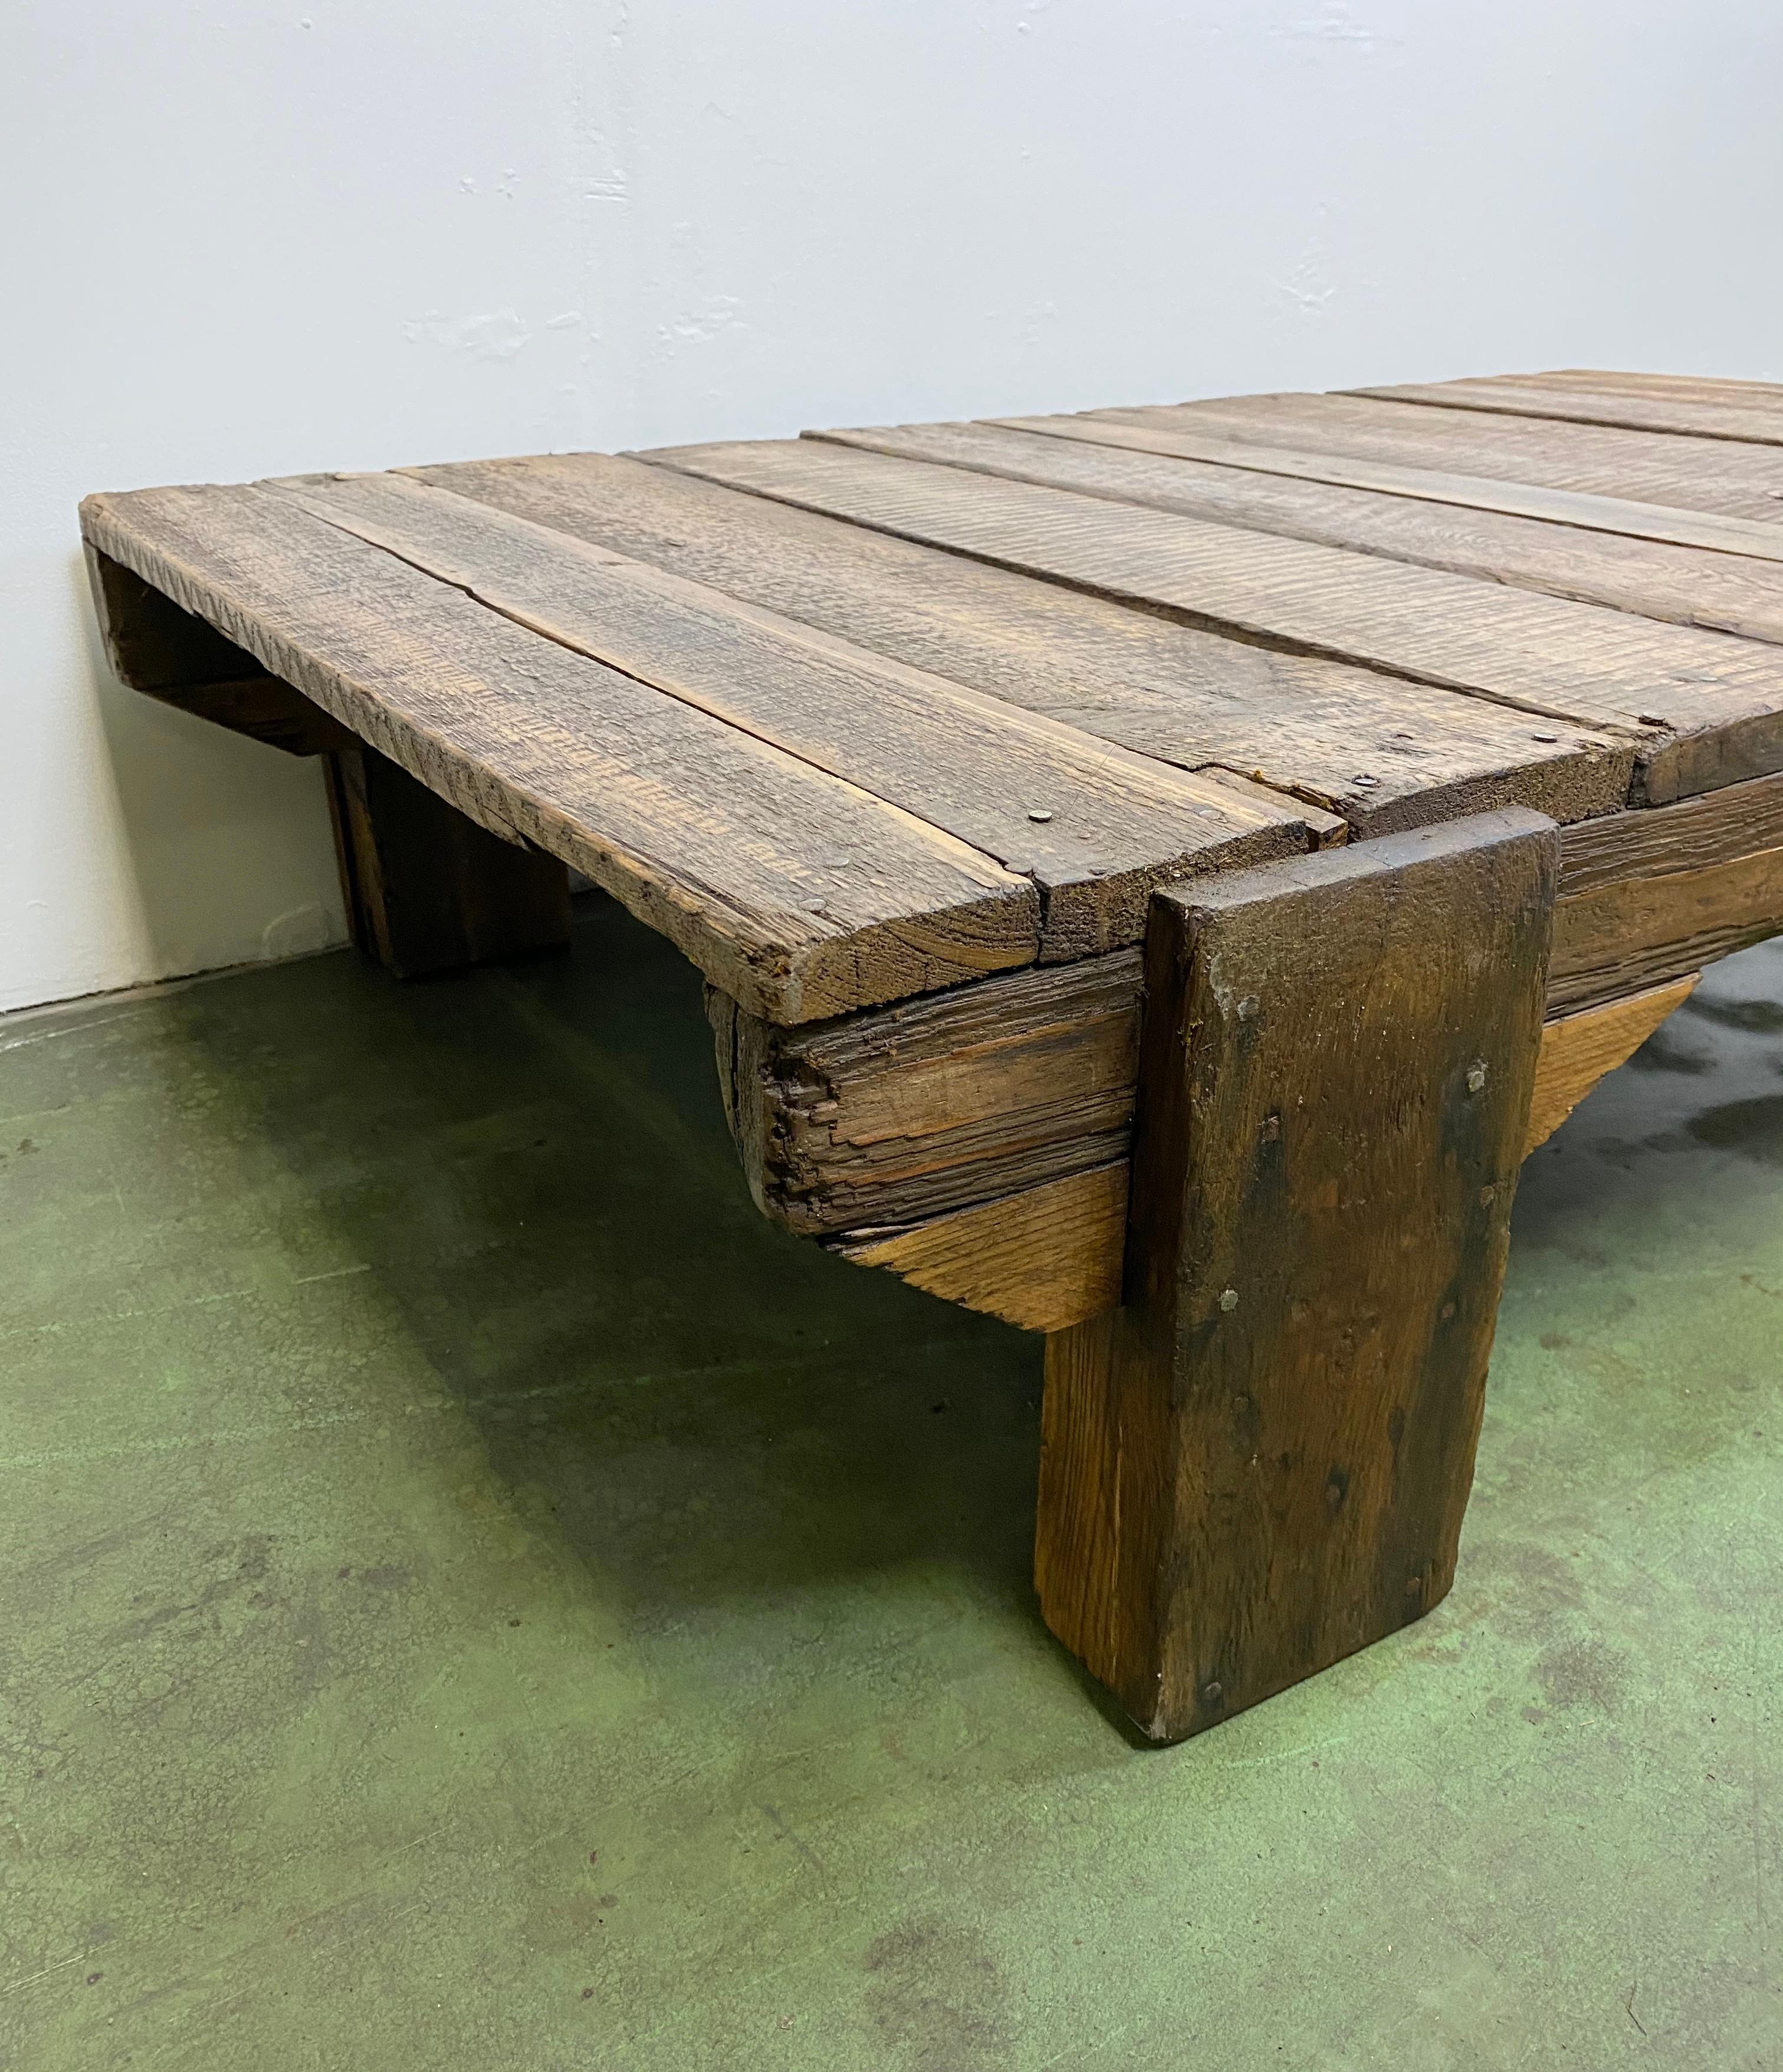 This vintage completely wooden coffee table was produced in former Czechoslovakia during the 1950s. The weight of the table is 25 kg. Nice patina.